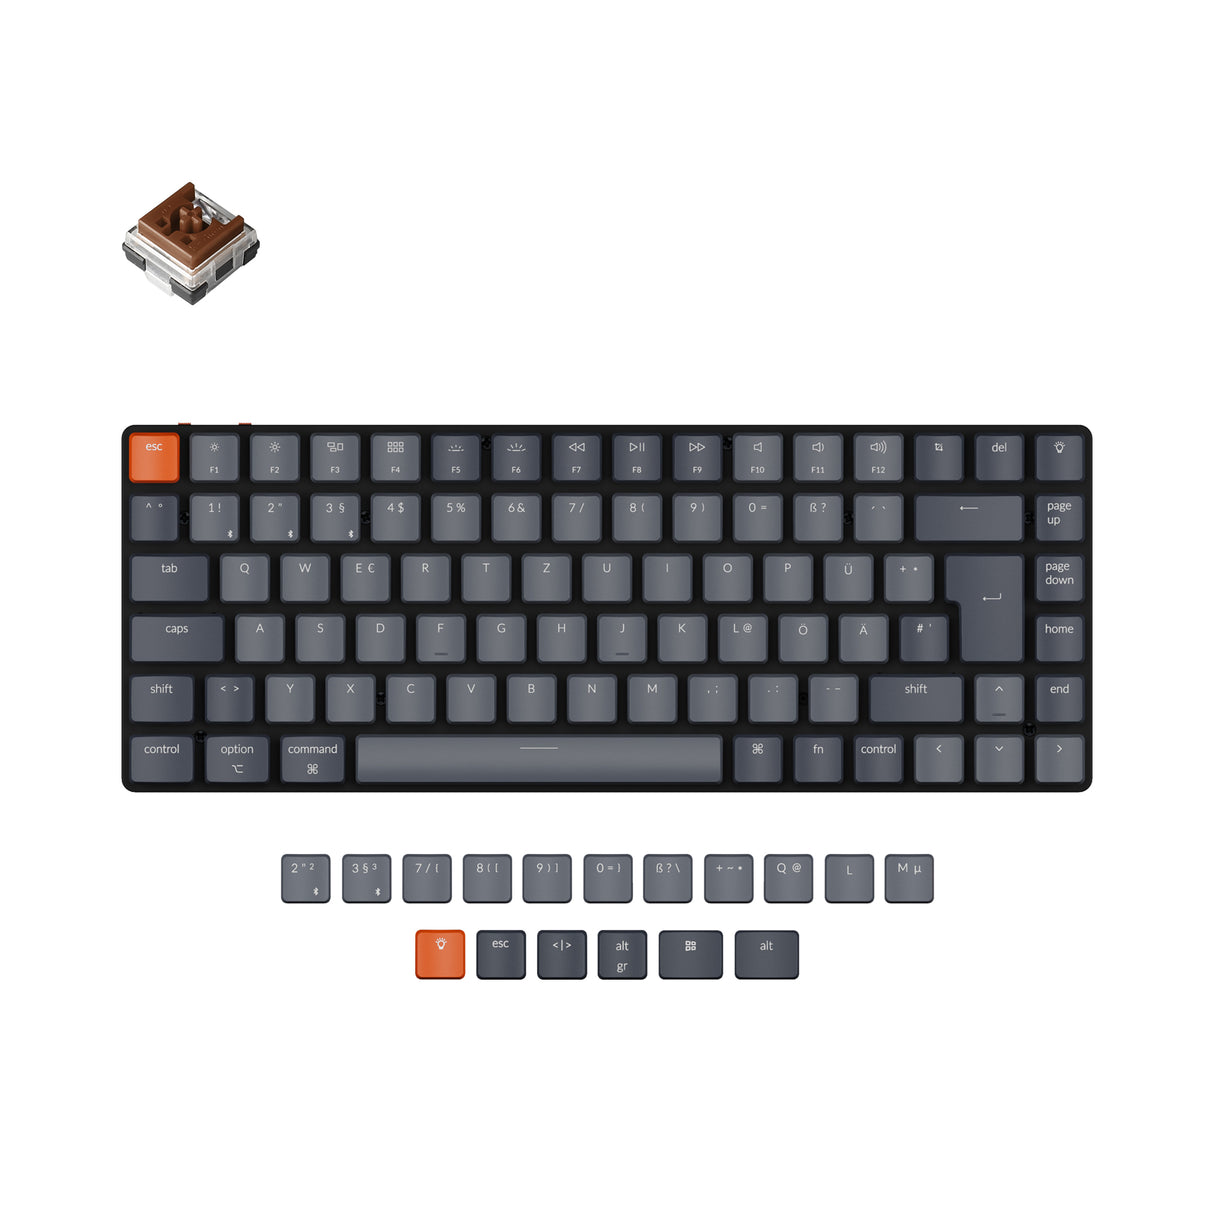 Keychron K3 ultra slim Hot swappable wireless mechanical keyboard Mac Windows iOS Android White backlight aluminum frame low profile Keychron Optical switch brown de iso layout